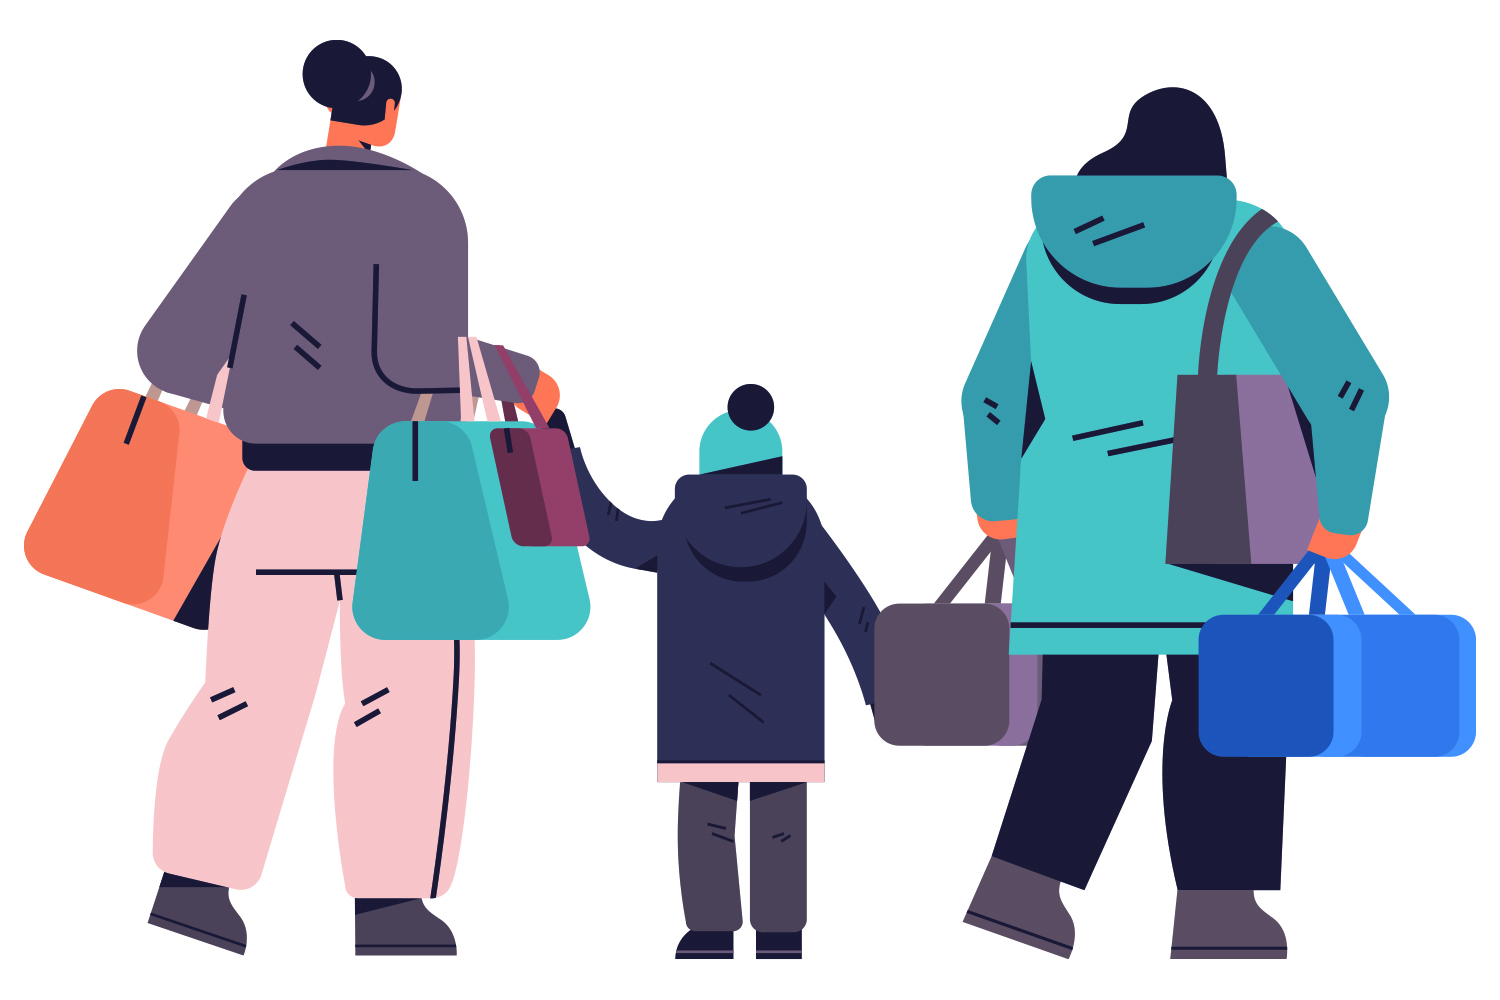 graphic of woman and children bundled up in winter coats carrying suitcases and bags.